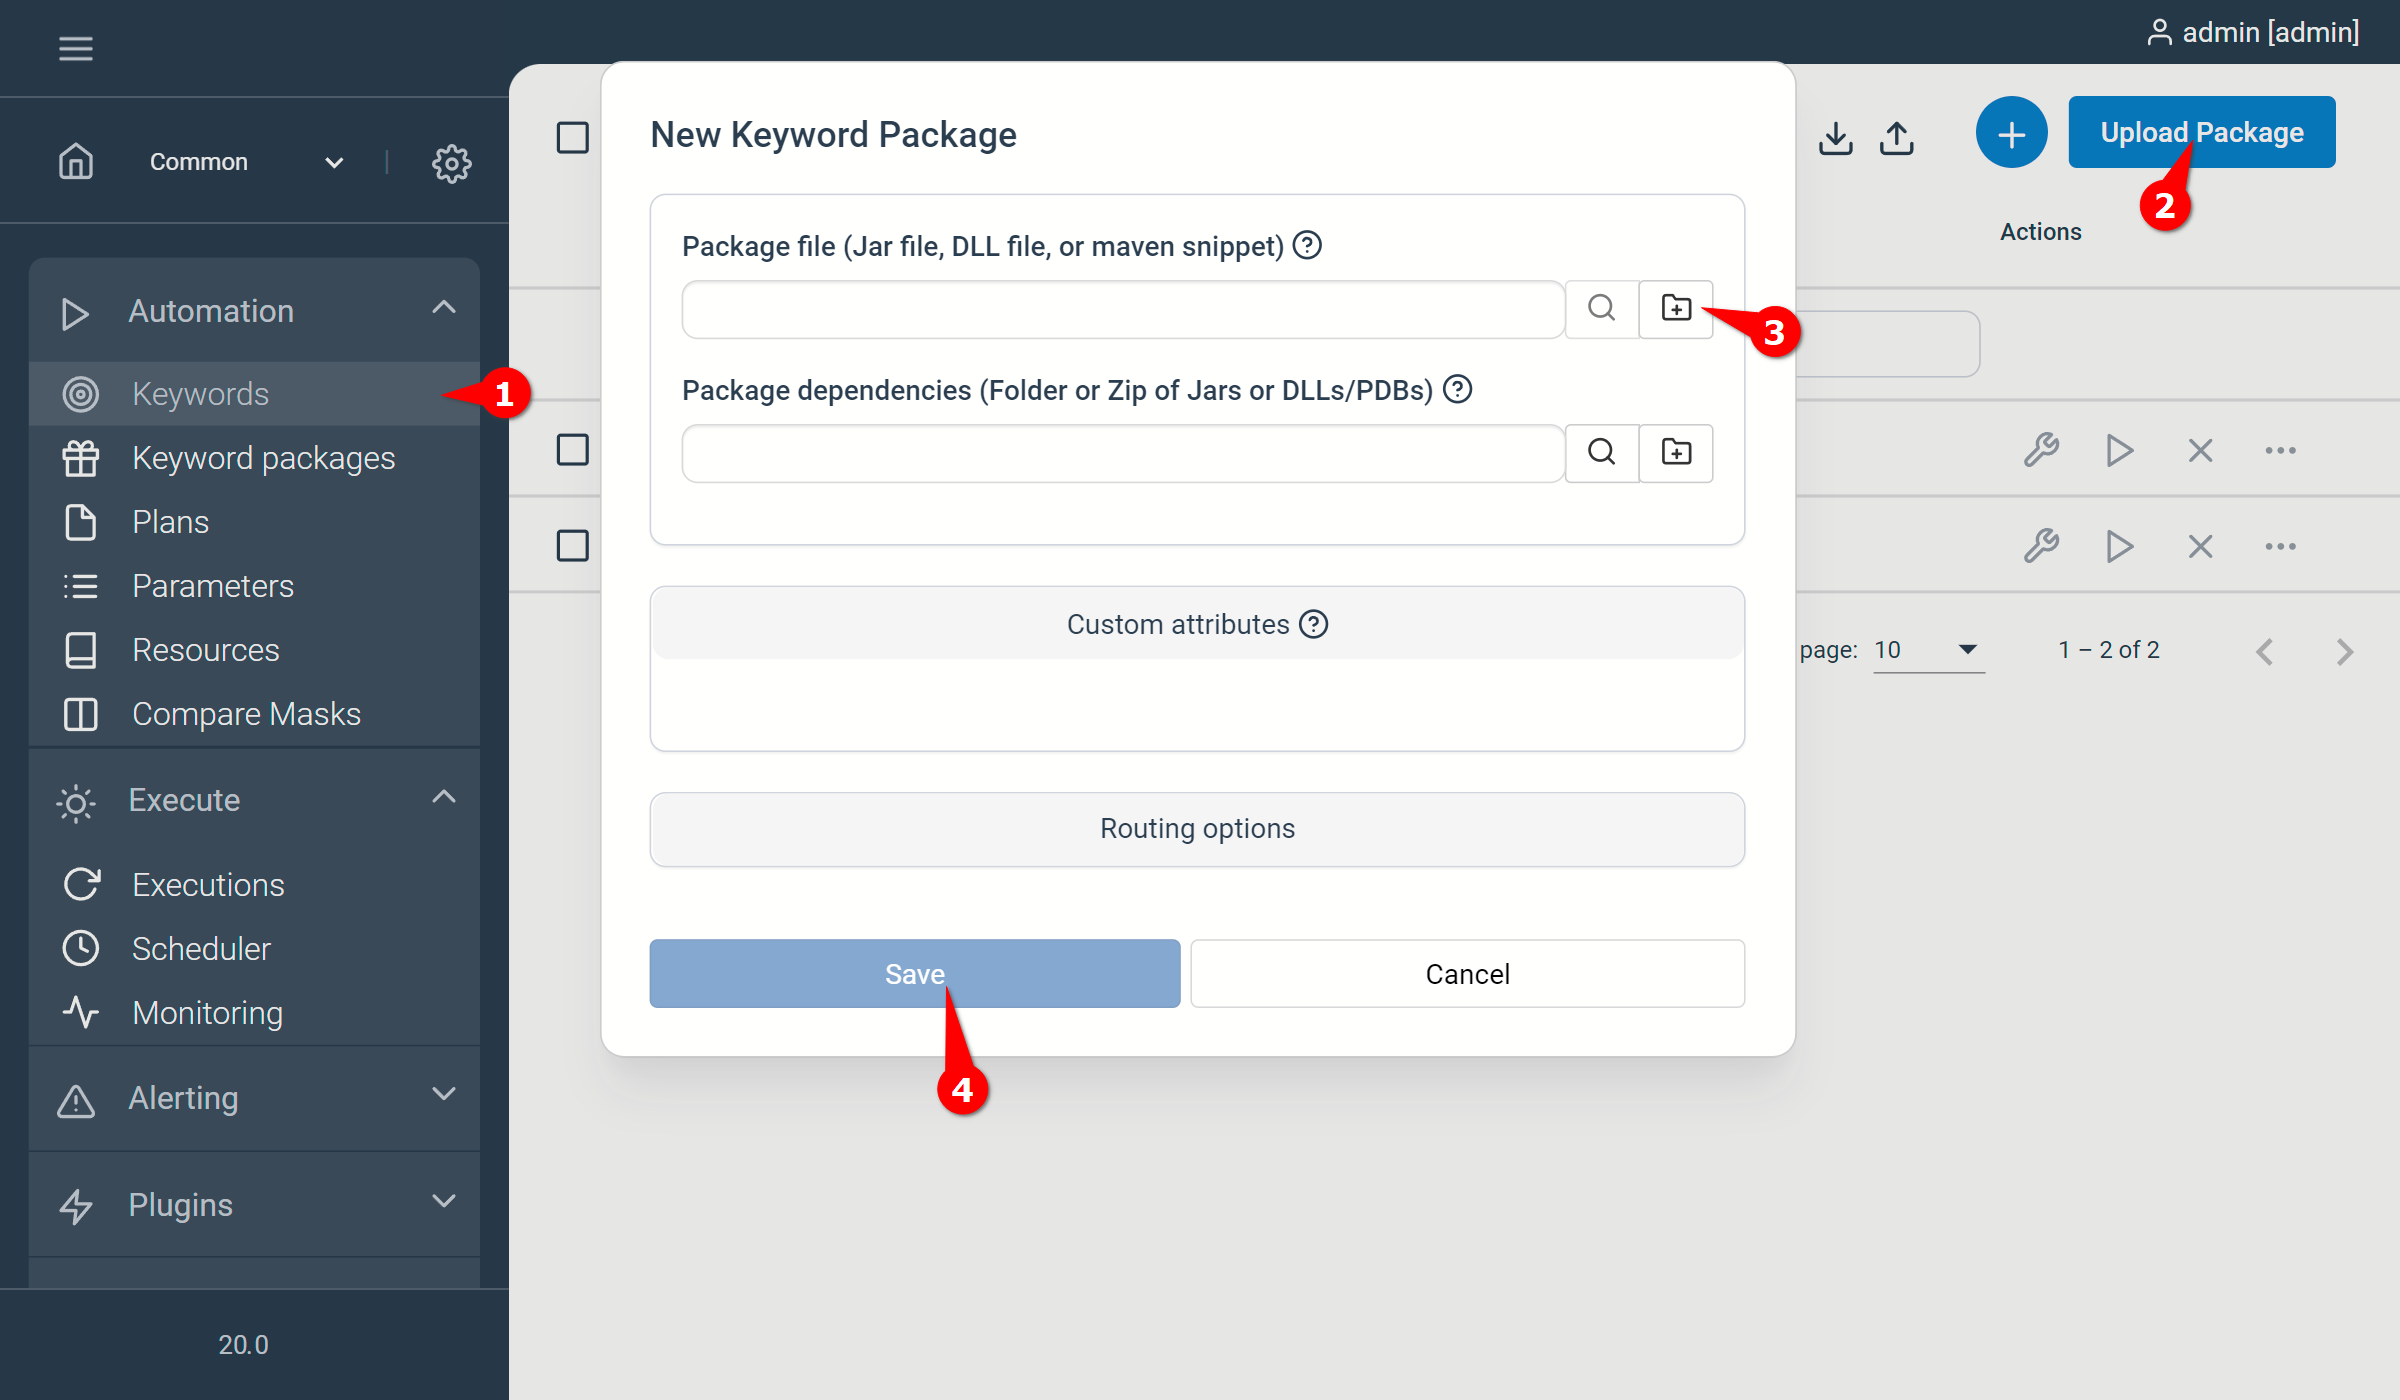 Image showing how to upload a keyword package